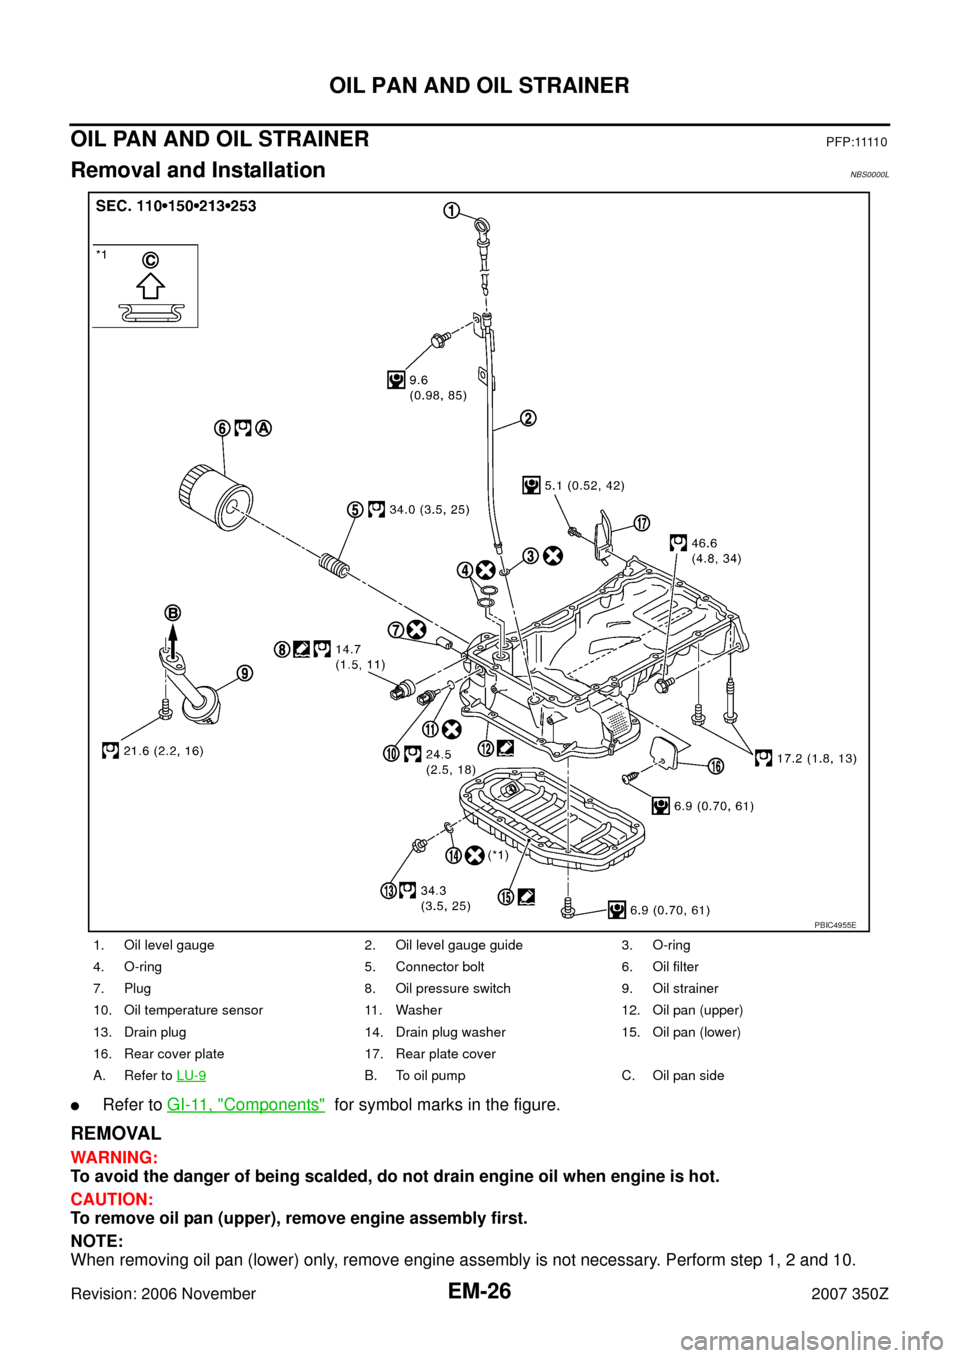 NISSAN 350Z 2007 Z33 Engine Mechanical Owners Manual EM-26
OIL PAN AND OIL STRAINER
Revision: 2006 November2007 350Z
OIL PAN AND OIL STRAINERP F P : 1111 0
Removal and InstallationNBS0000L
Refer to GI-11, "Components"  for symbol marks in the figure.
R